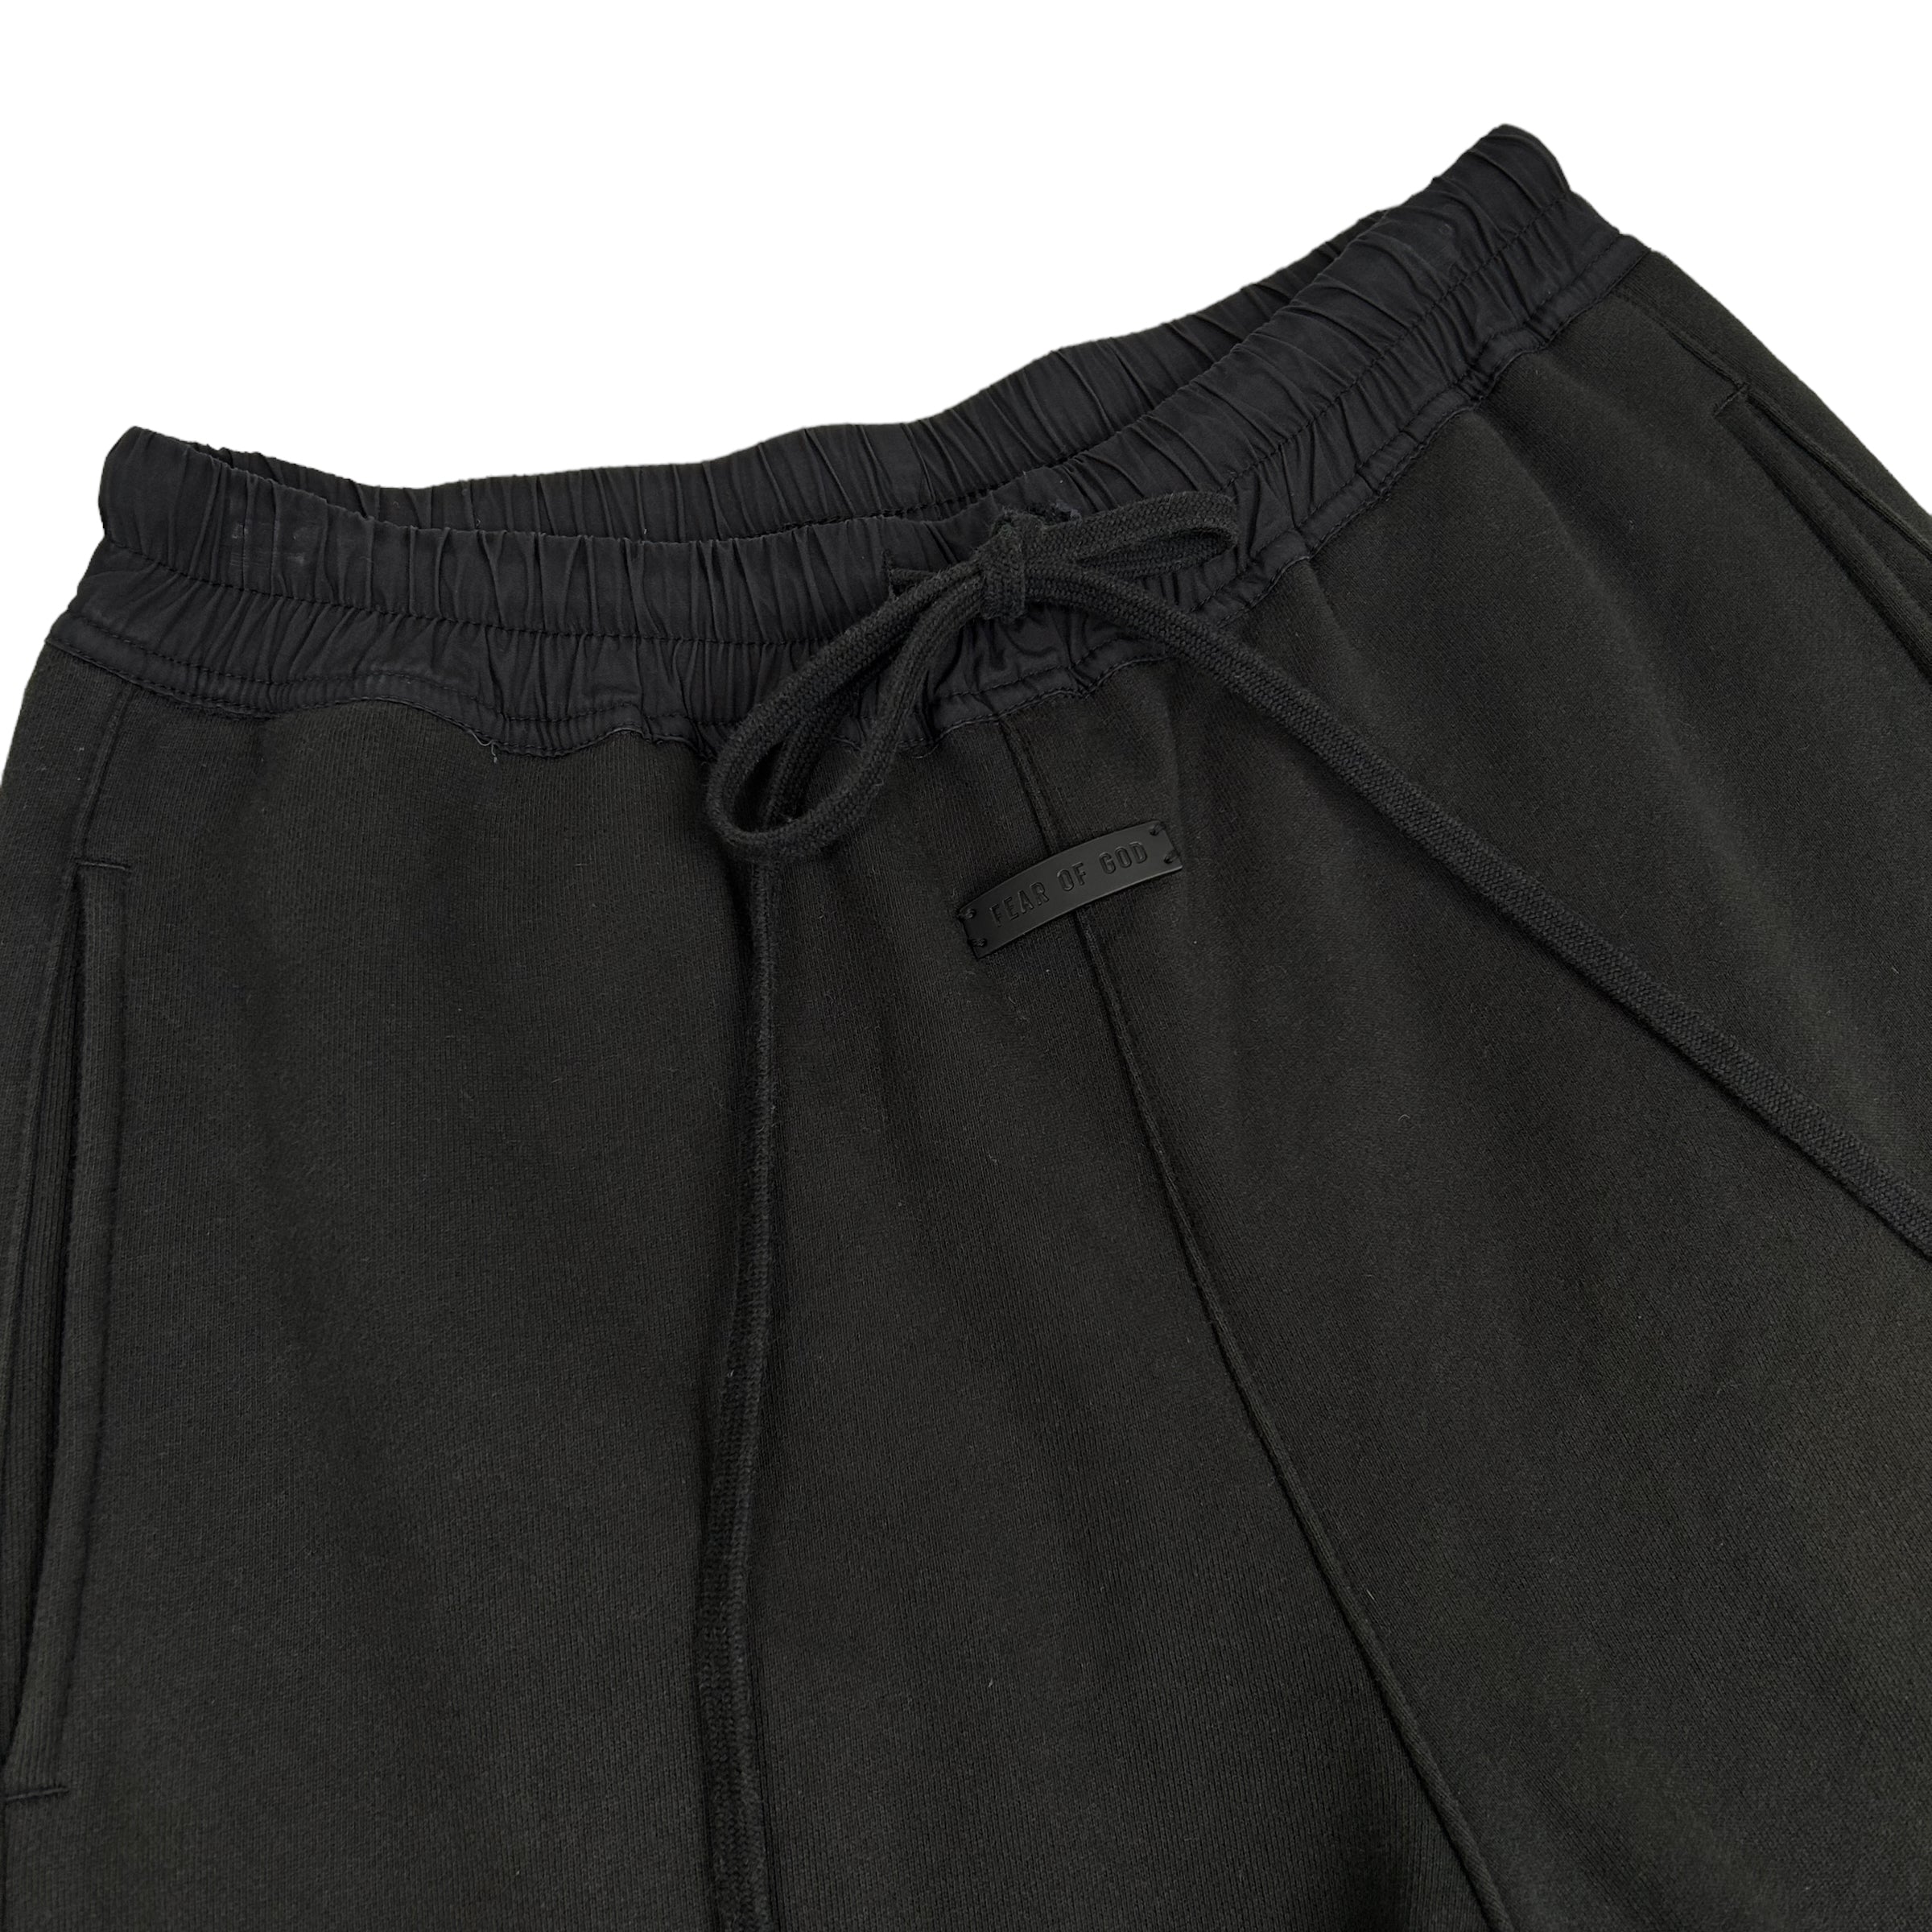 FEAR OF GOD SEVENTH COLLECTION SWEATPANTS